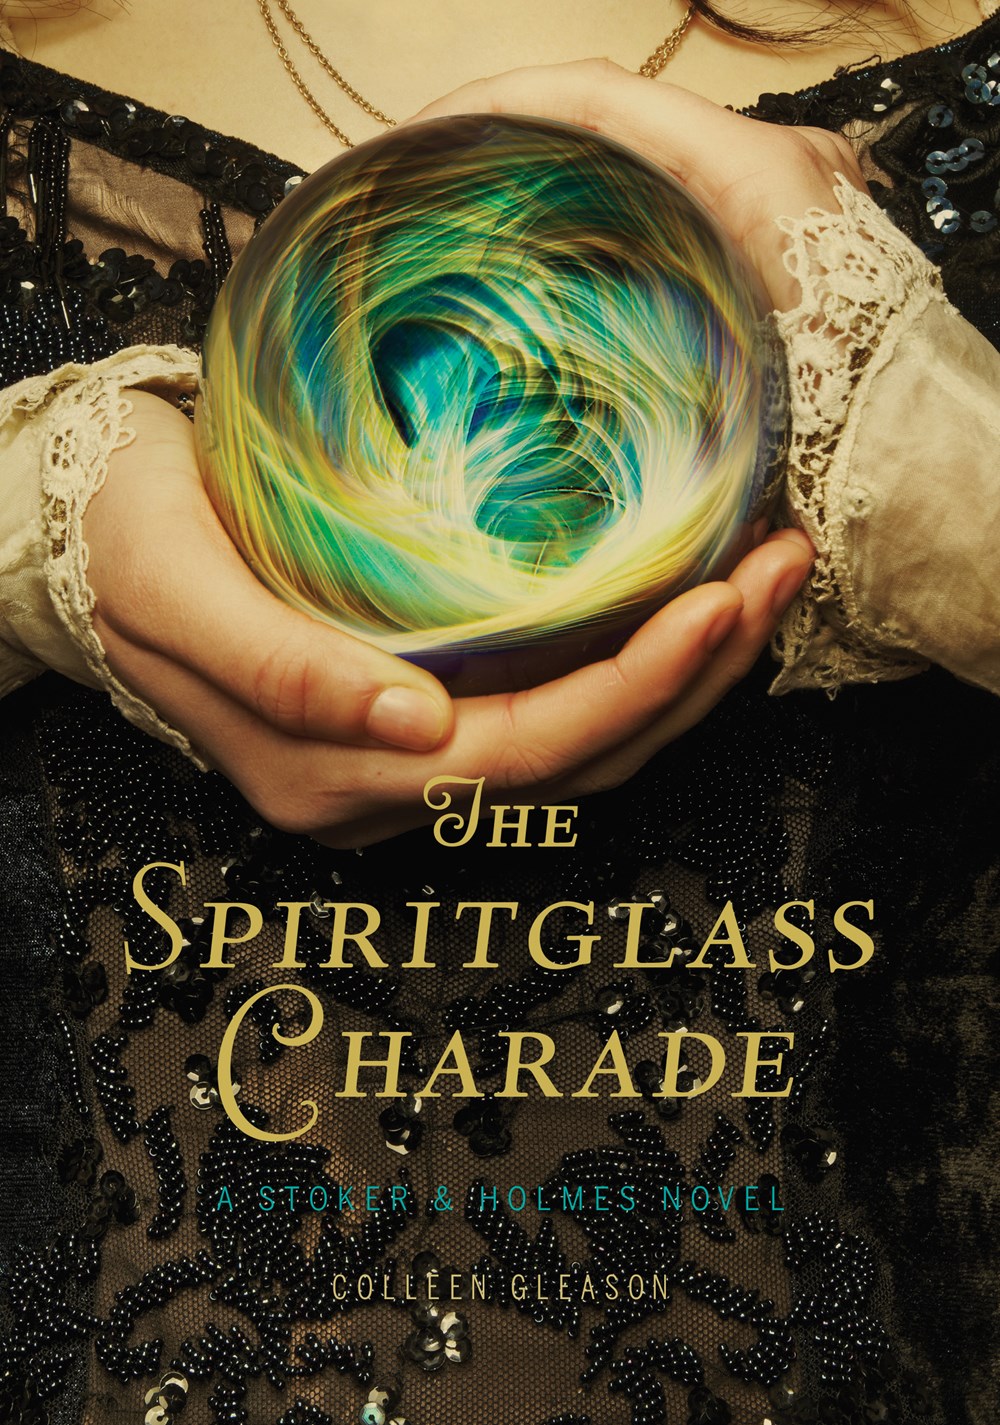 The Spiritglass Charade by Colleen Gleason Book Cover.jpg